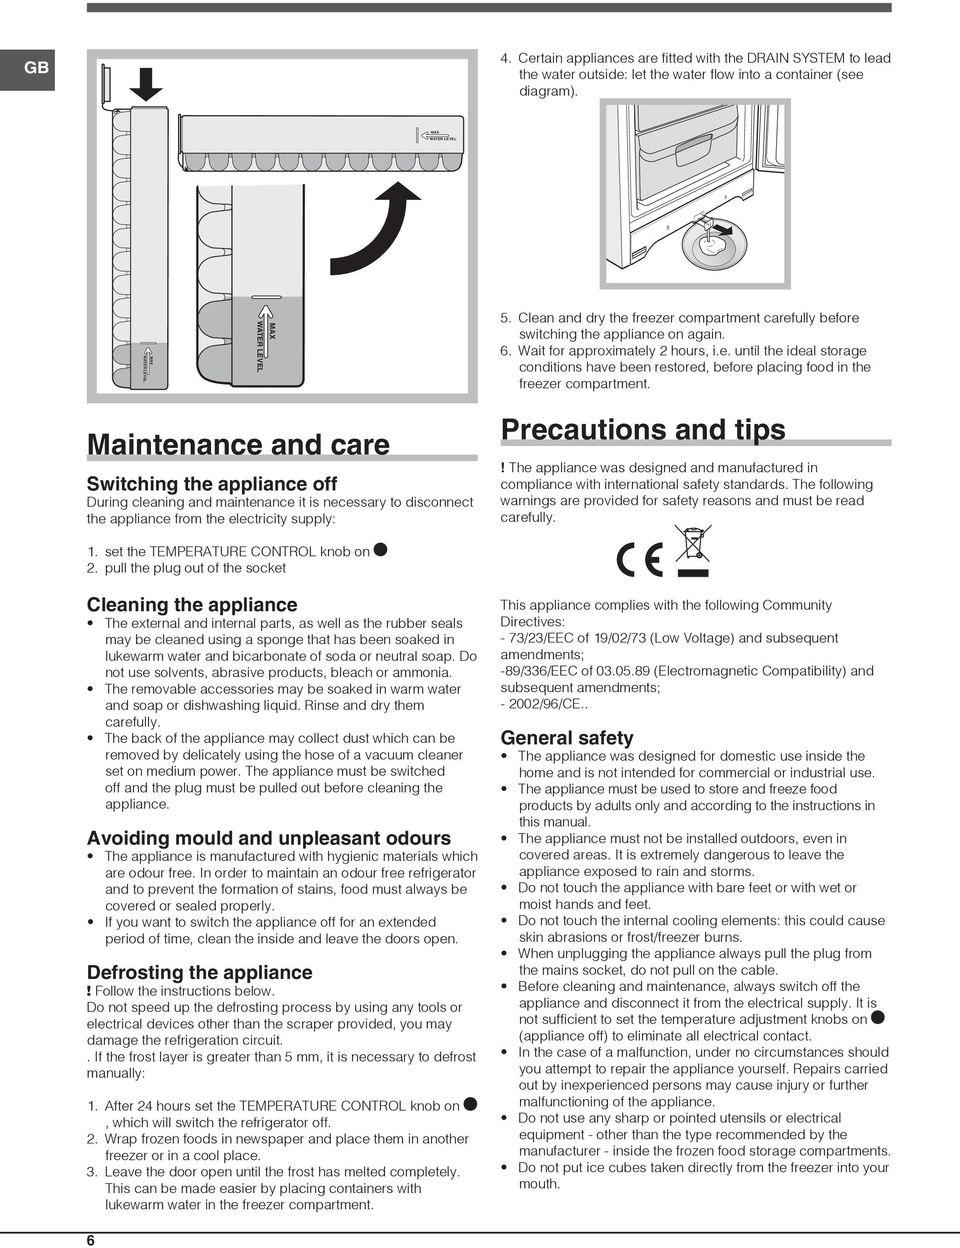 Maintenance and care Switching the appliance off During cleaning and maintenance it is necessary to disconnect the appliance from the electricity supply: Precautions and tips!